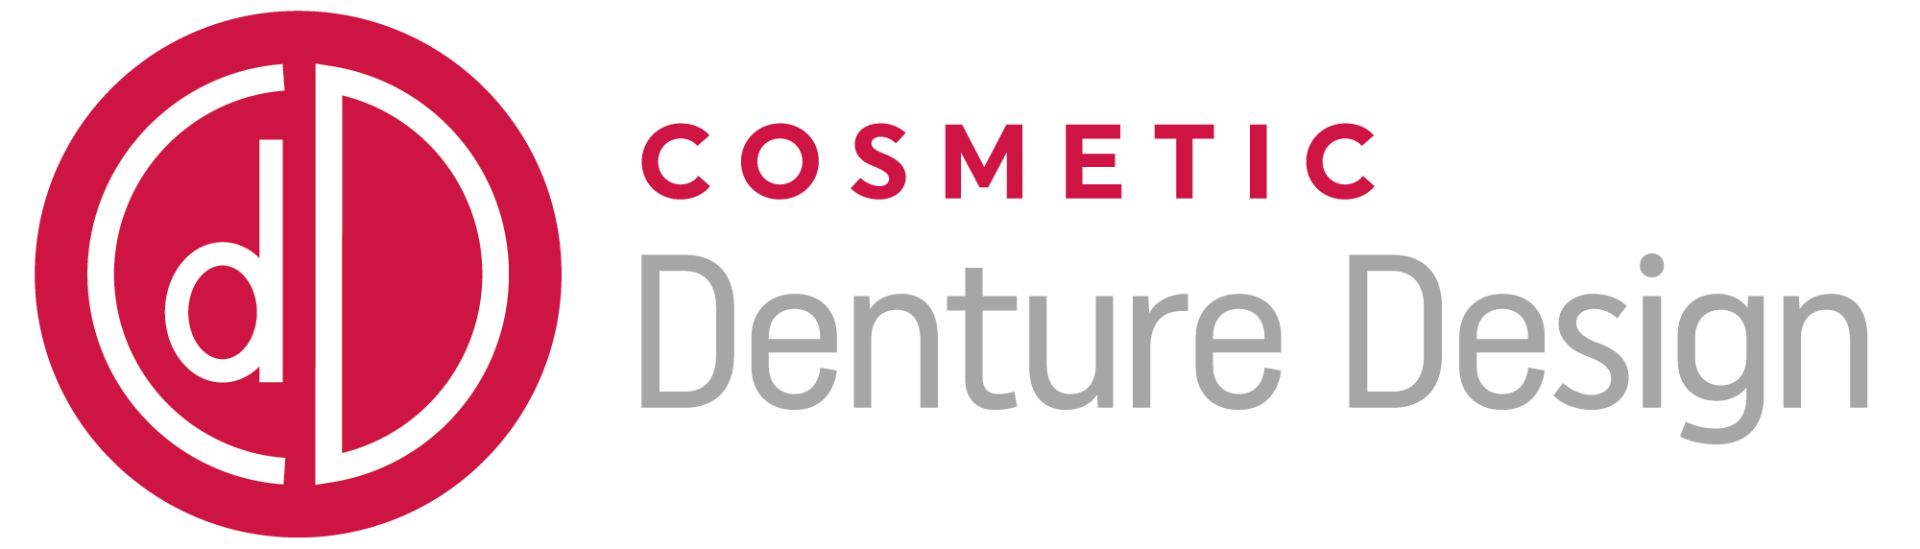 The logo for cosmetic denture design is red and white